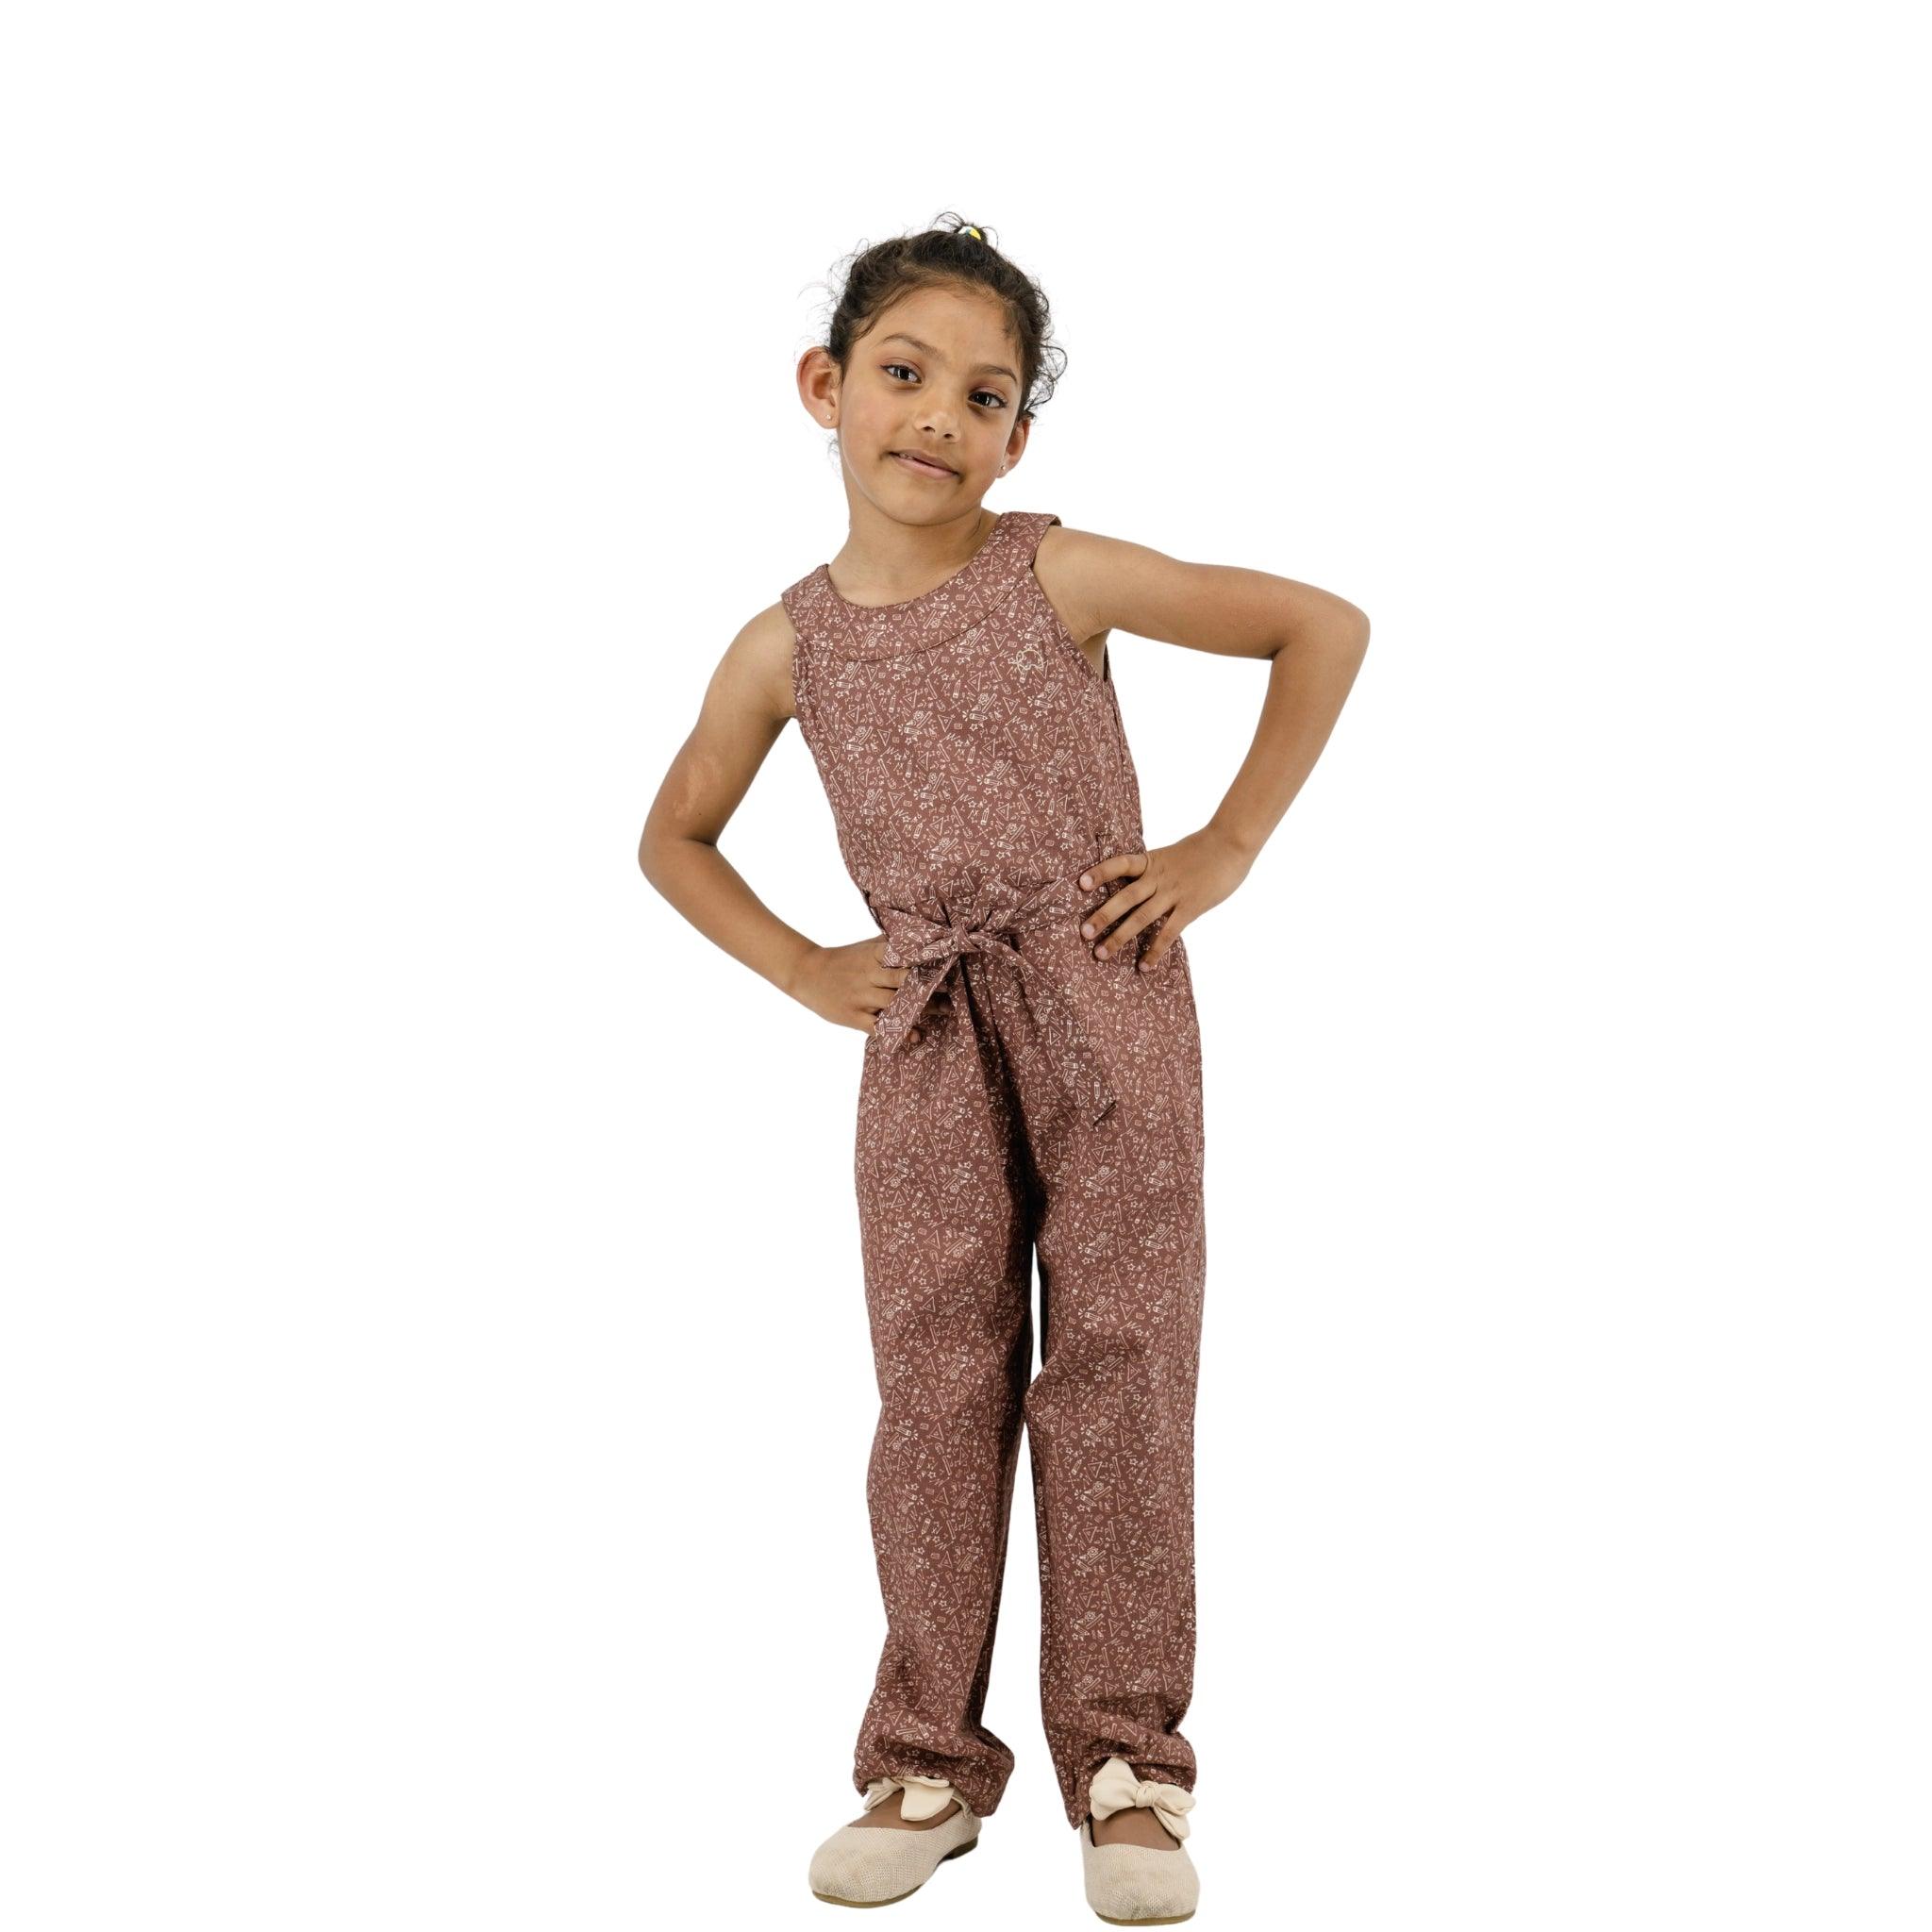 Young girl in a Karee Cocoa Brown Cotton Jumpsuit for Girls with a pattern, hands on her hips, posing confidently, isolated on a white background.